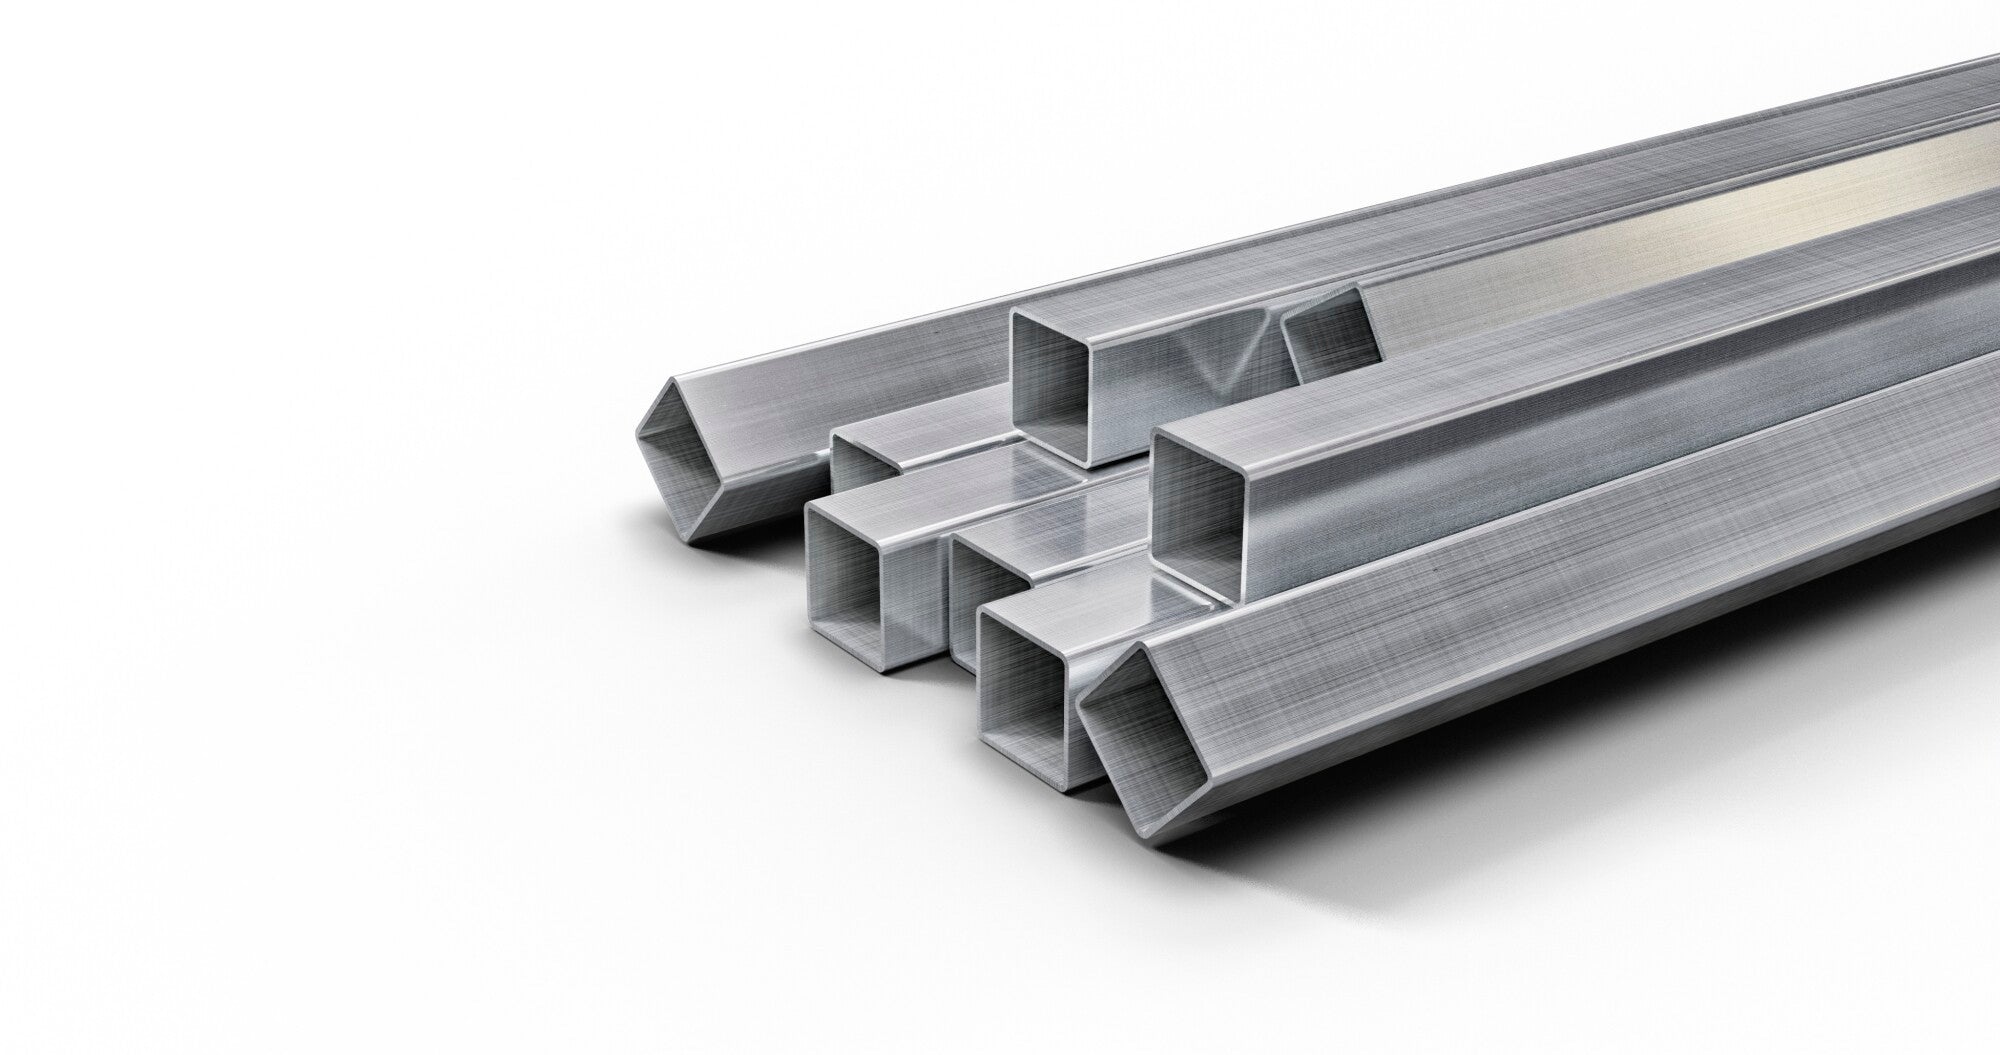 What Are the Applications of Hot Rolled Steel?